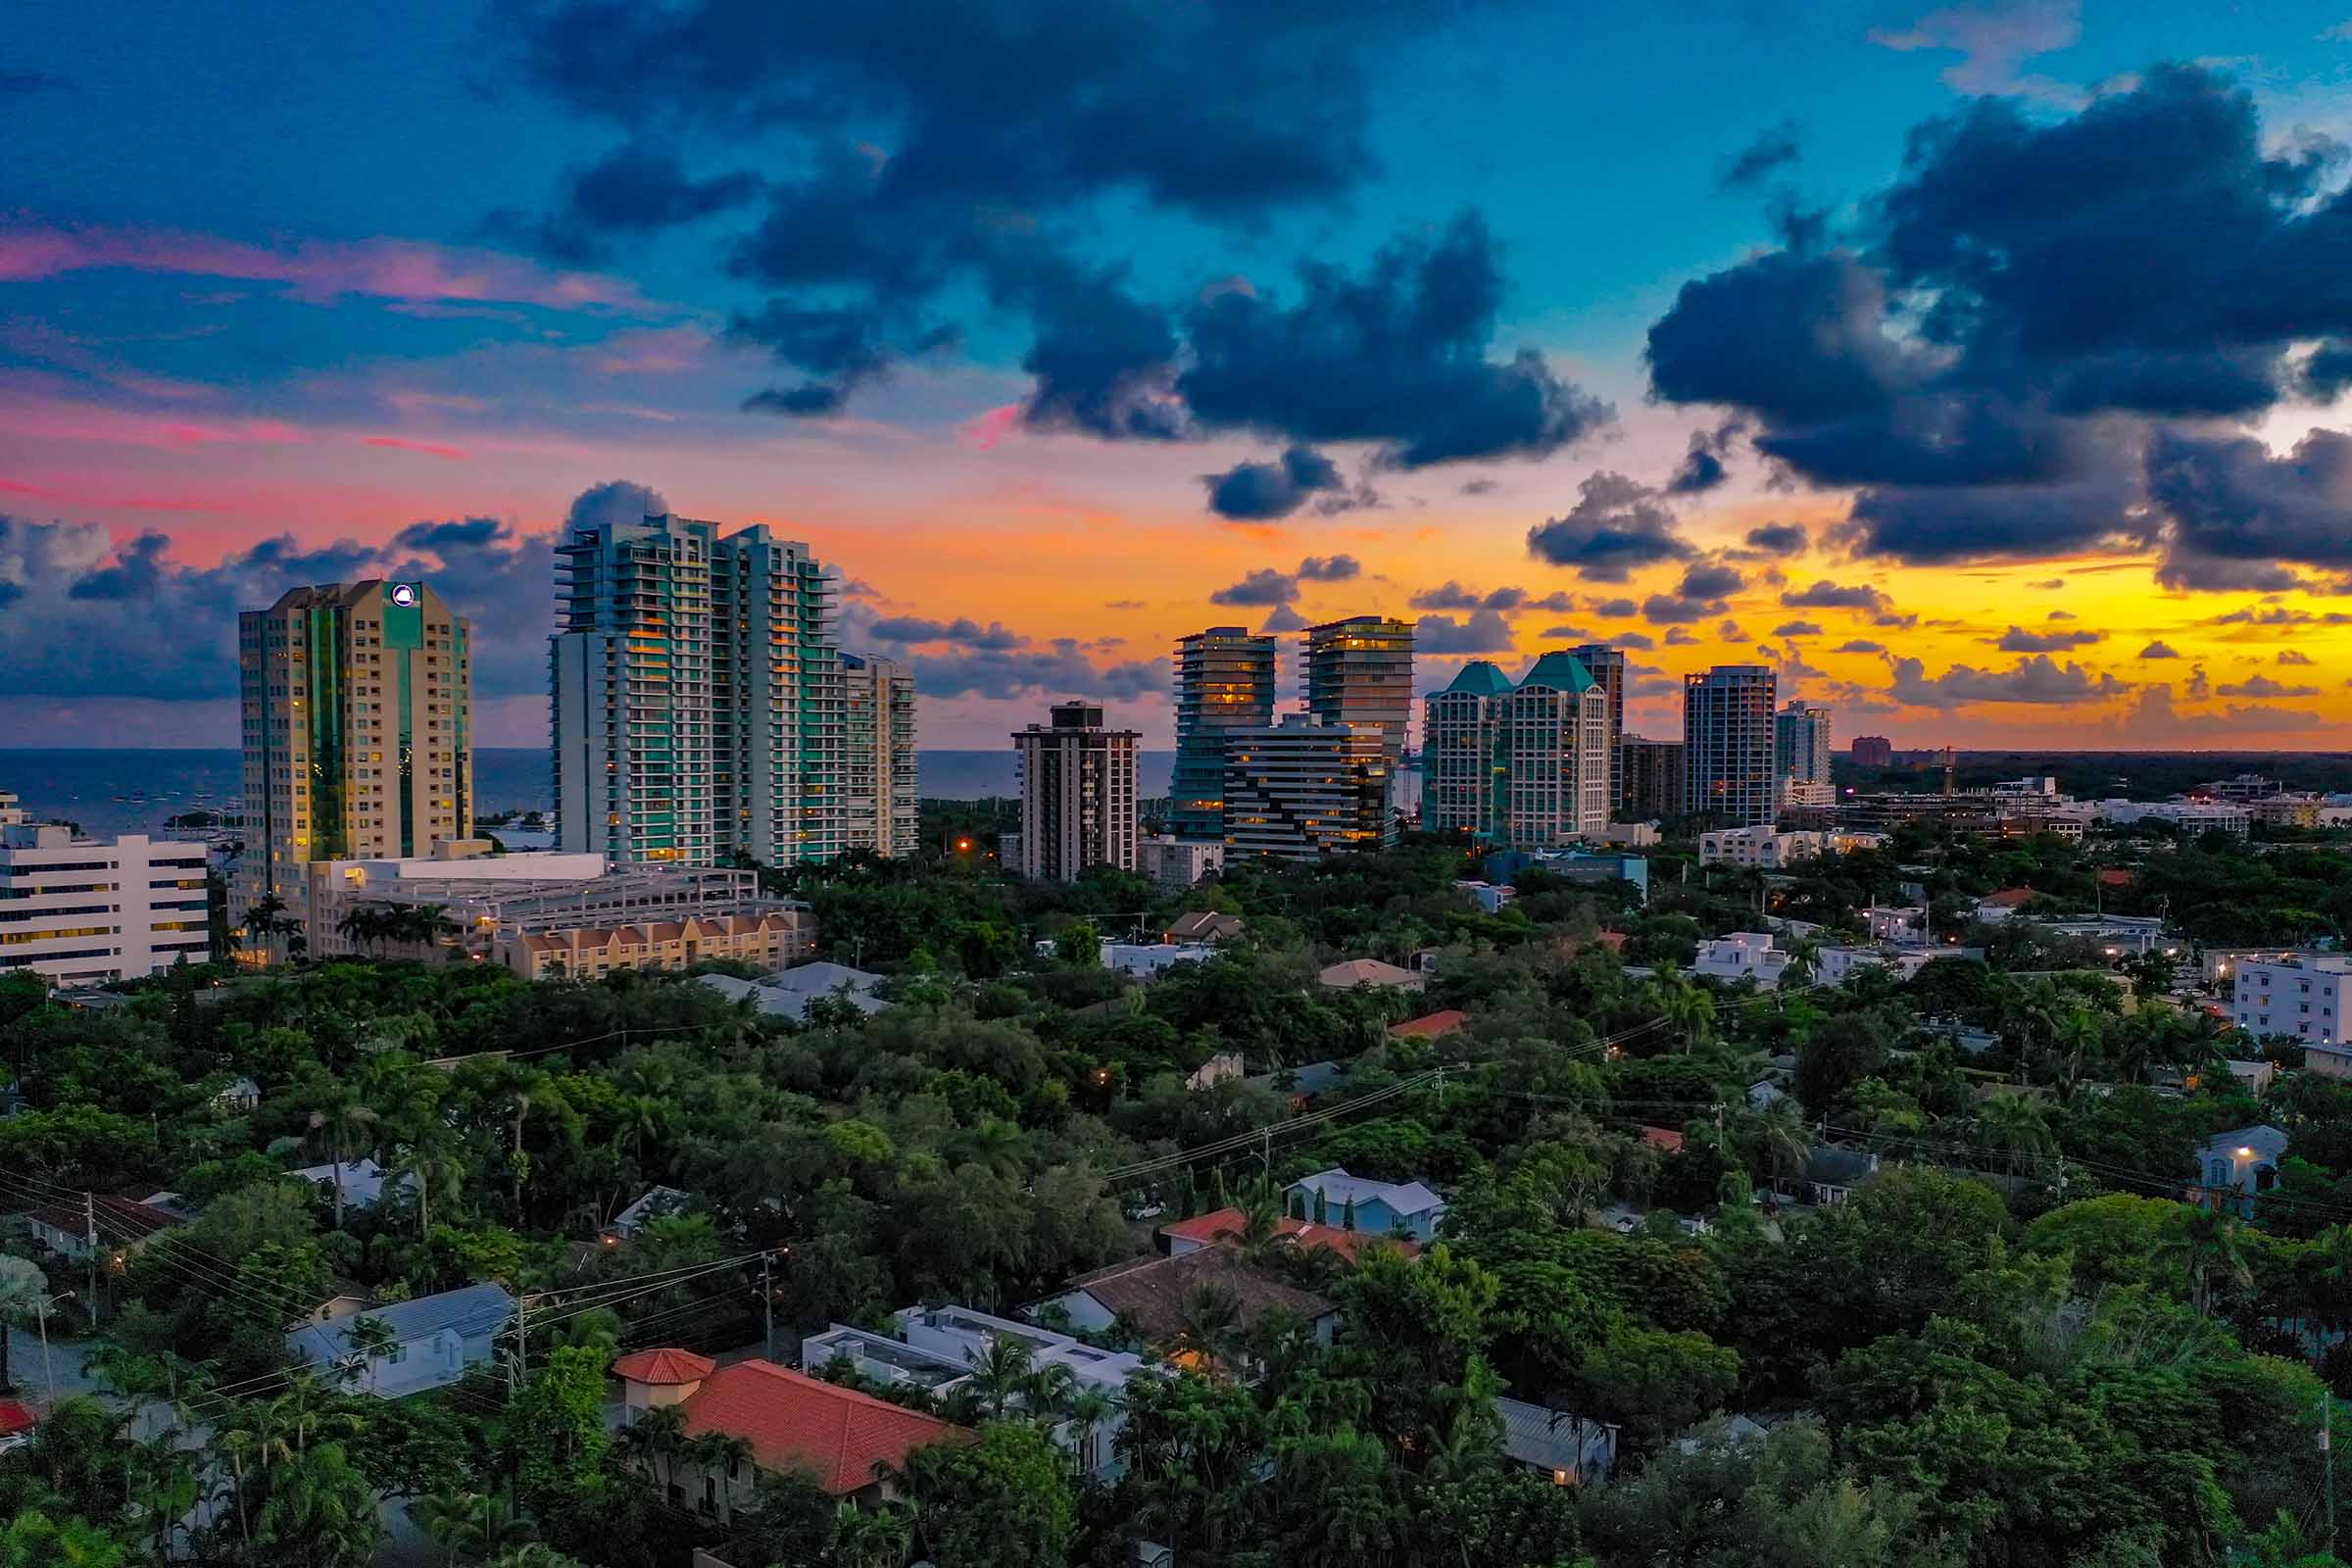 This Miami Neighborhood Ranked In Top 30 Neighborhoods In The WORLD For 2023